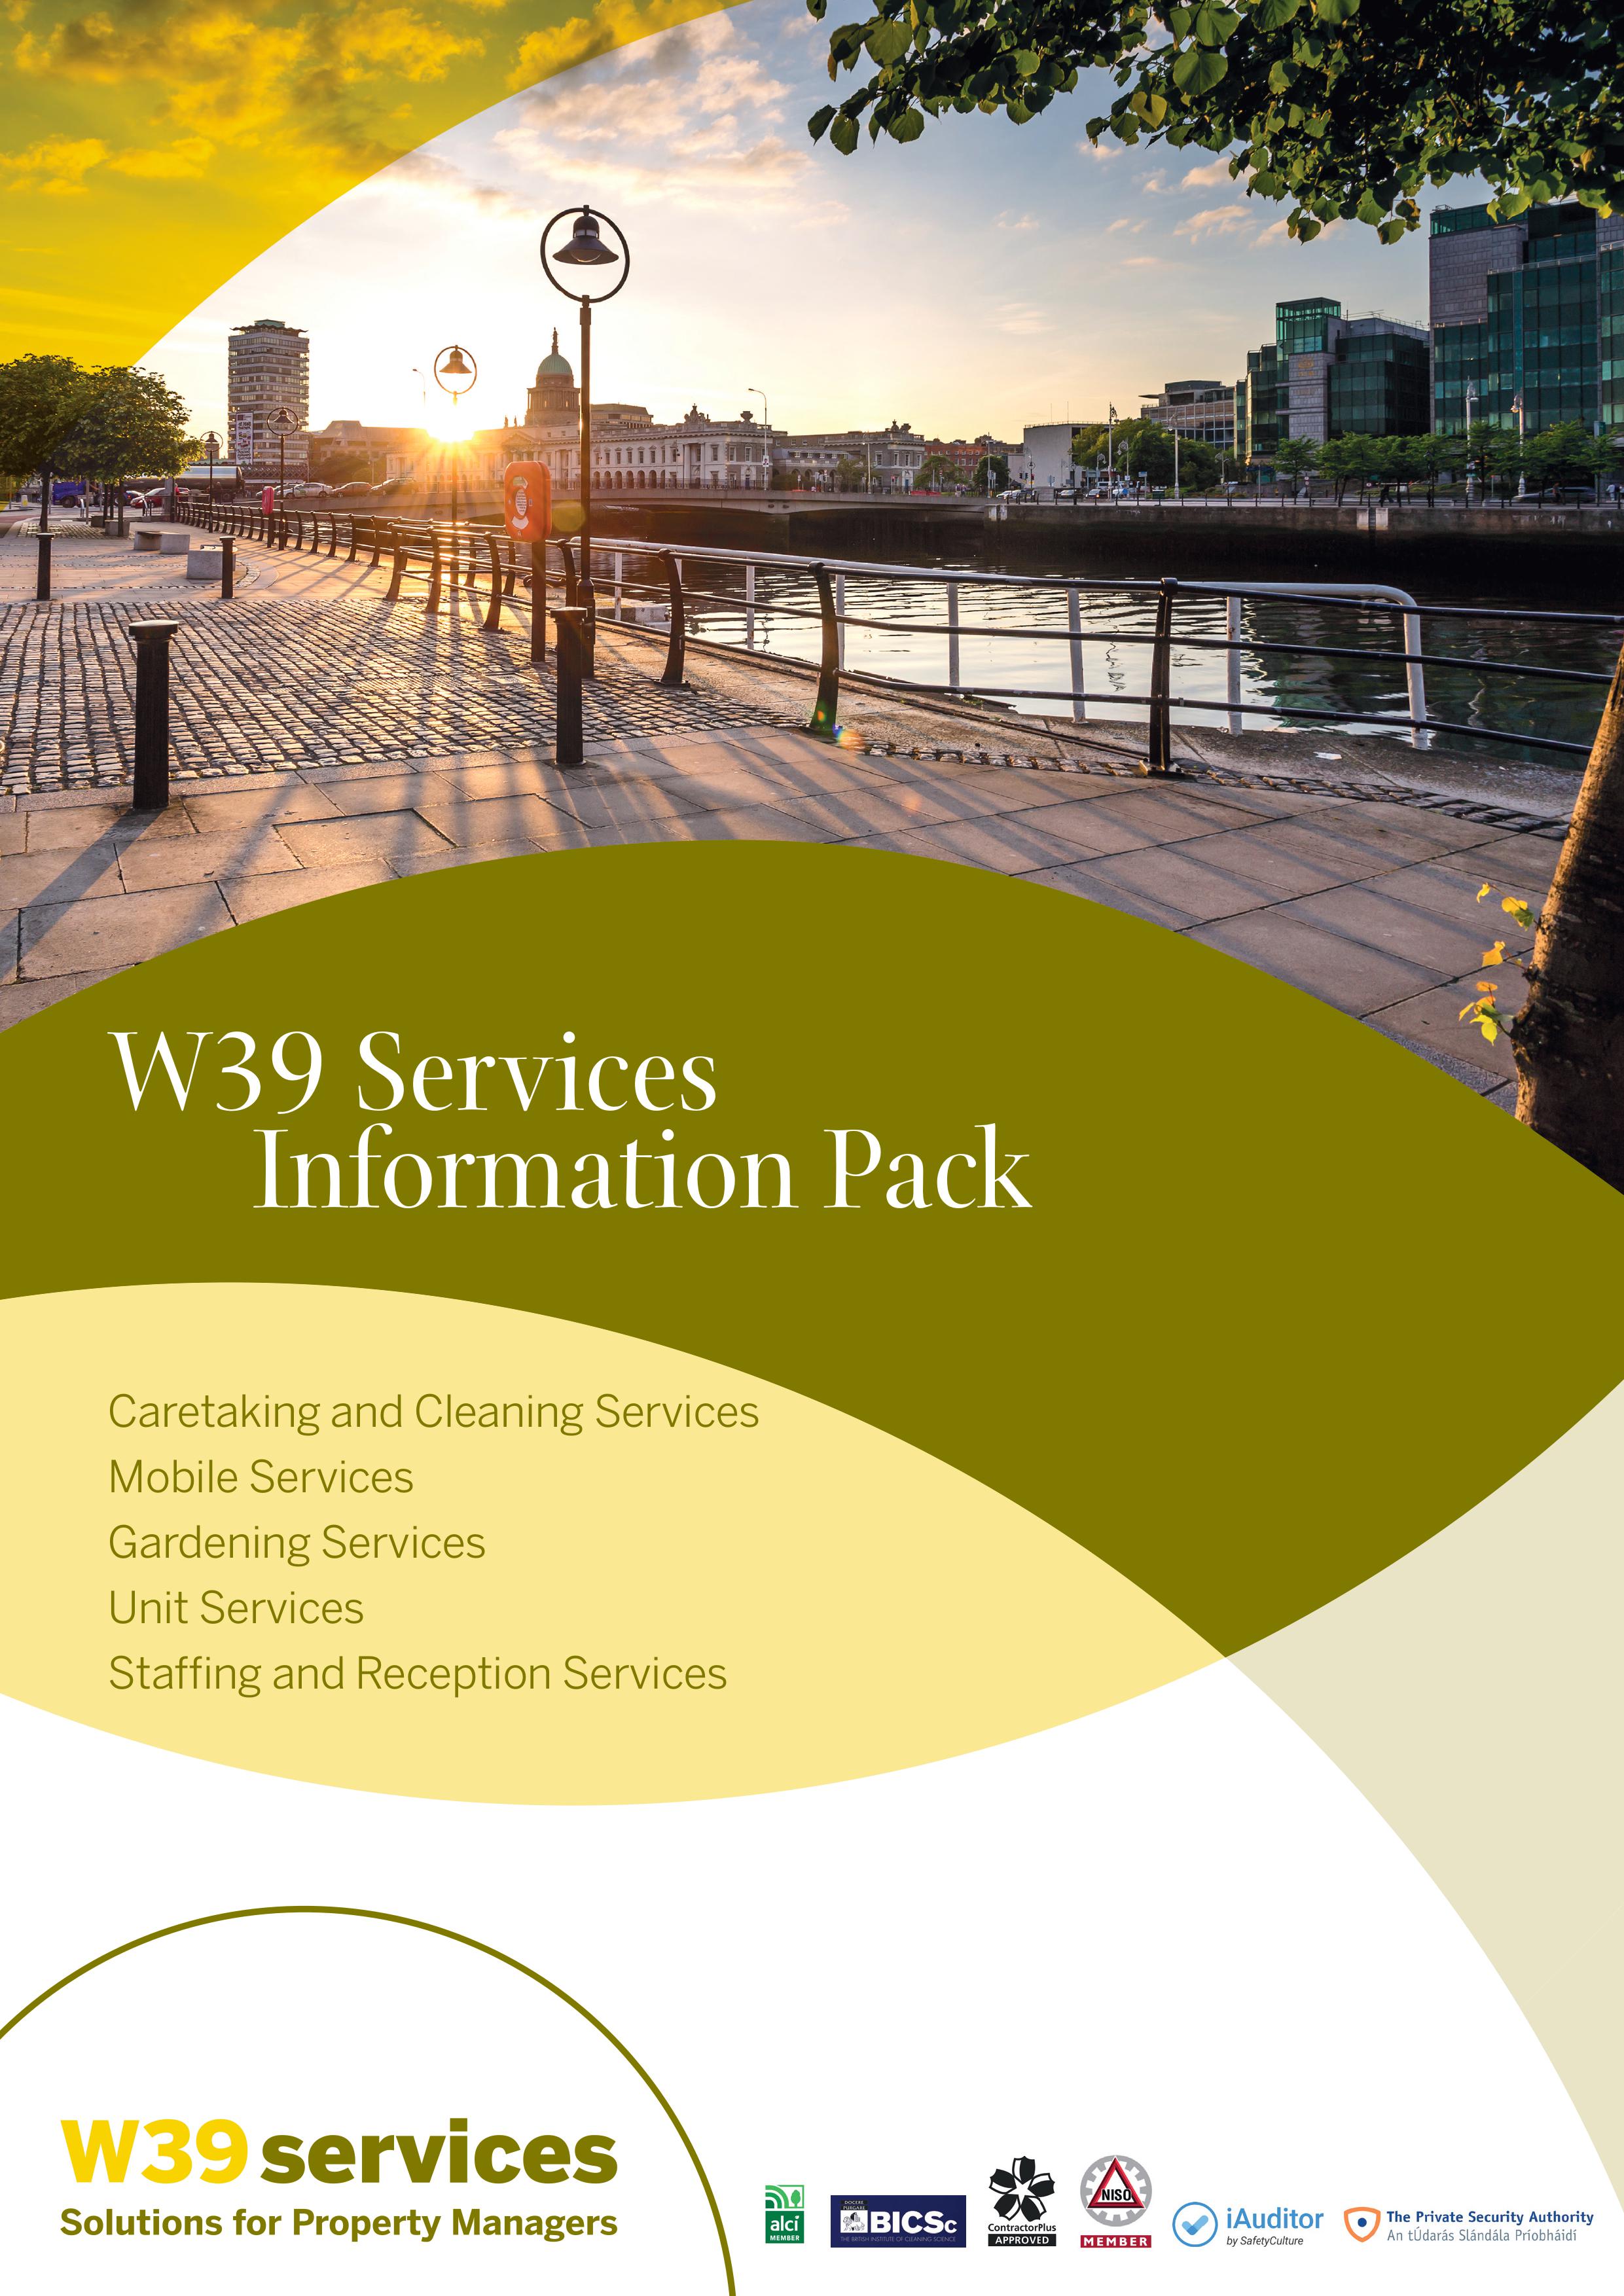 W39 Services Information Pack